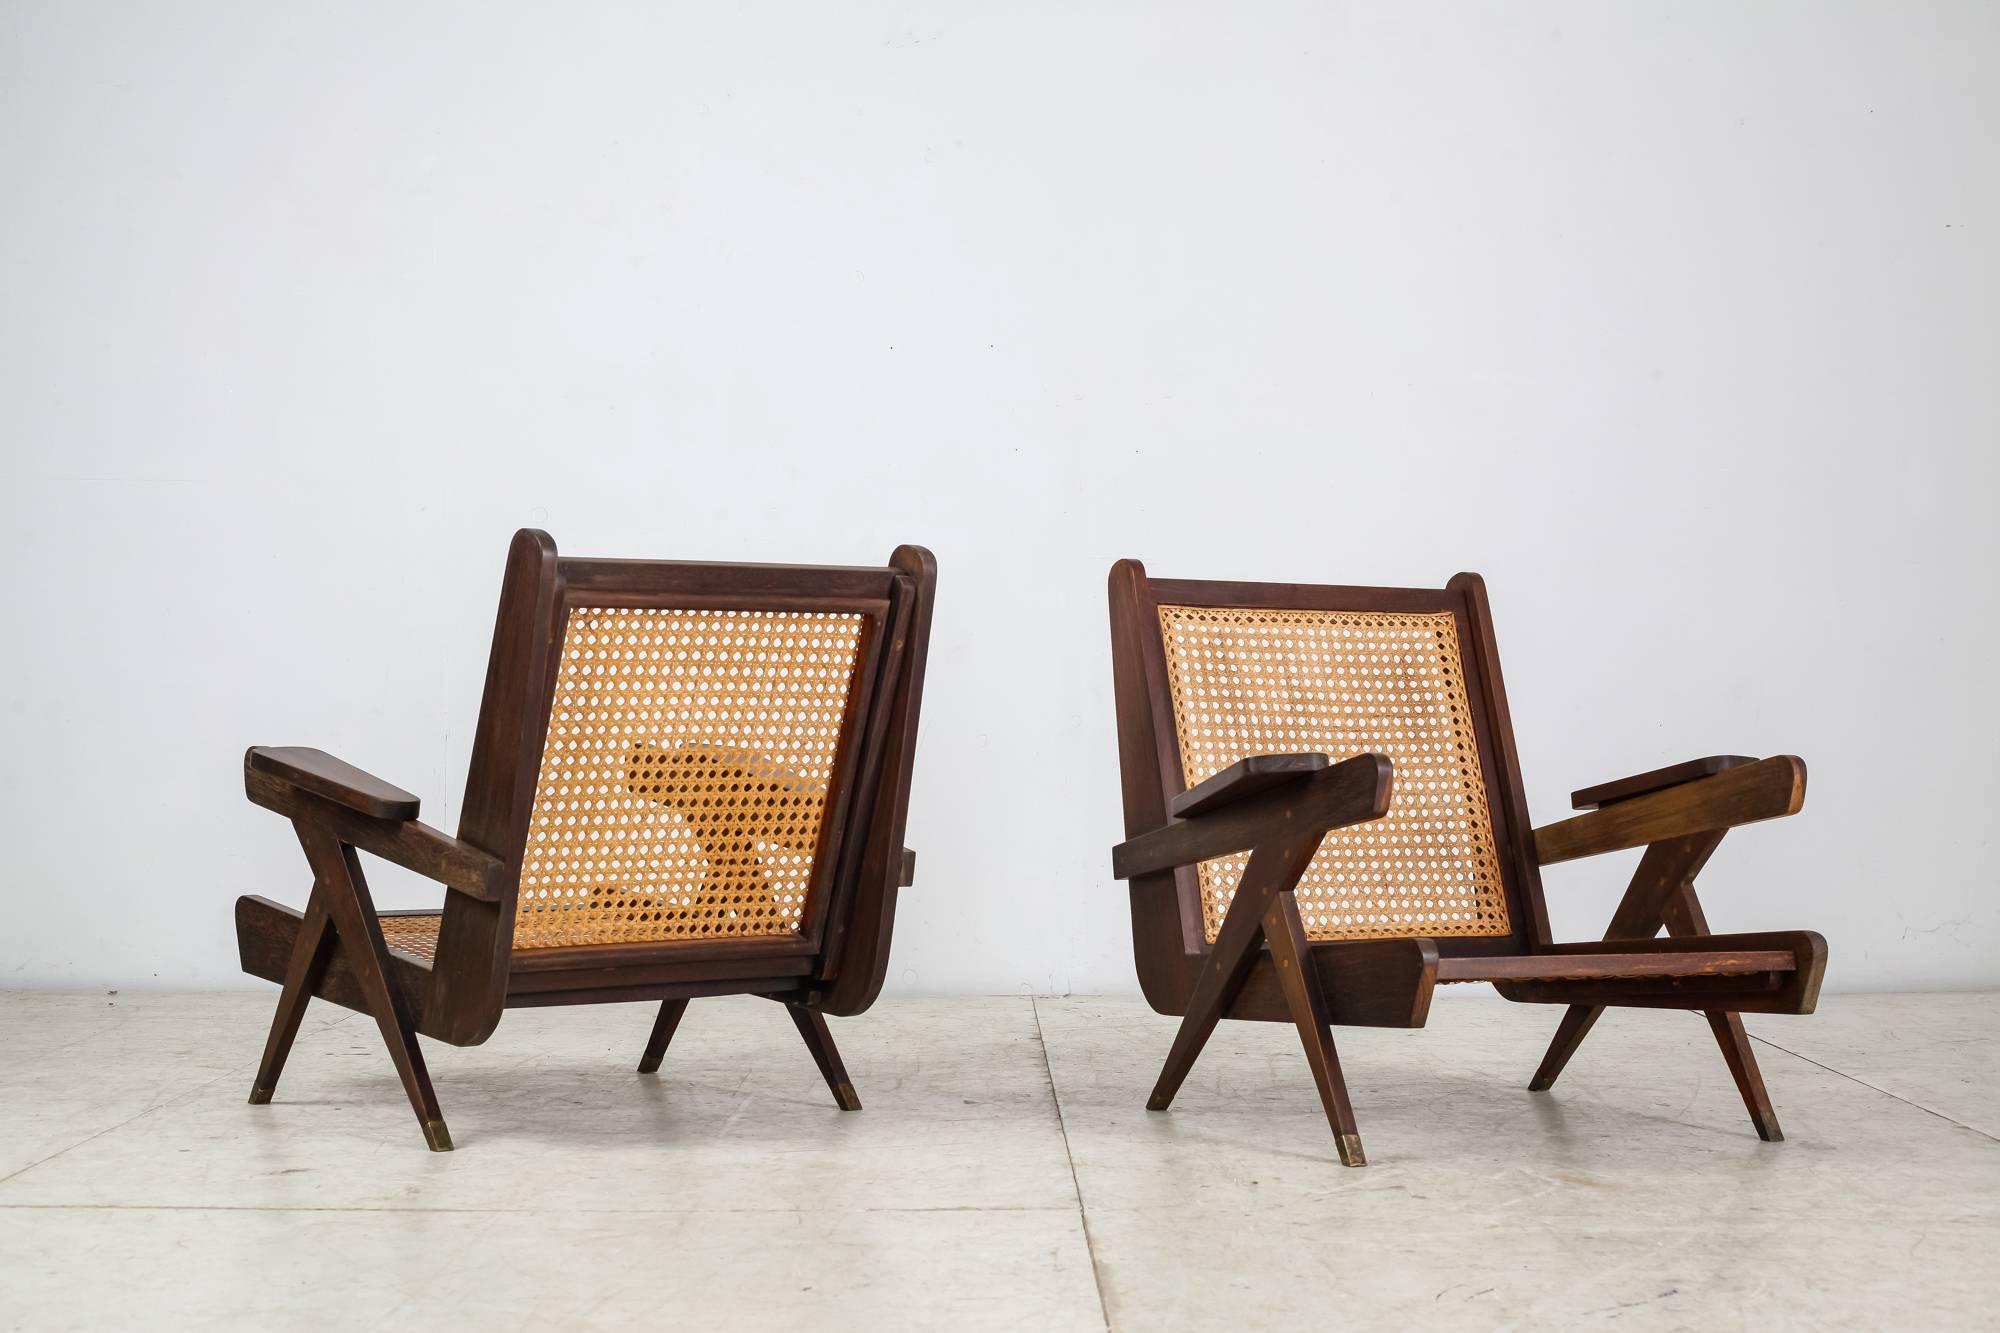 A pair of modernist French armchairs, strongly reminiscent of the work of Pierre Jeanneret. The chairs are made of a dark teak frame with tapering arm pads, a woven cane seating and bronze feet. Both the wood and bronze have a lovely patina and are